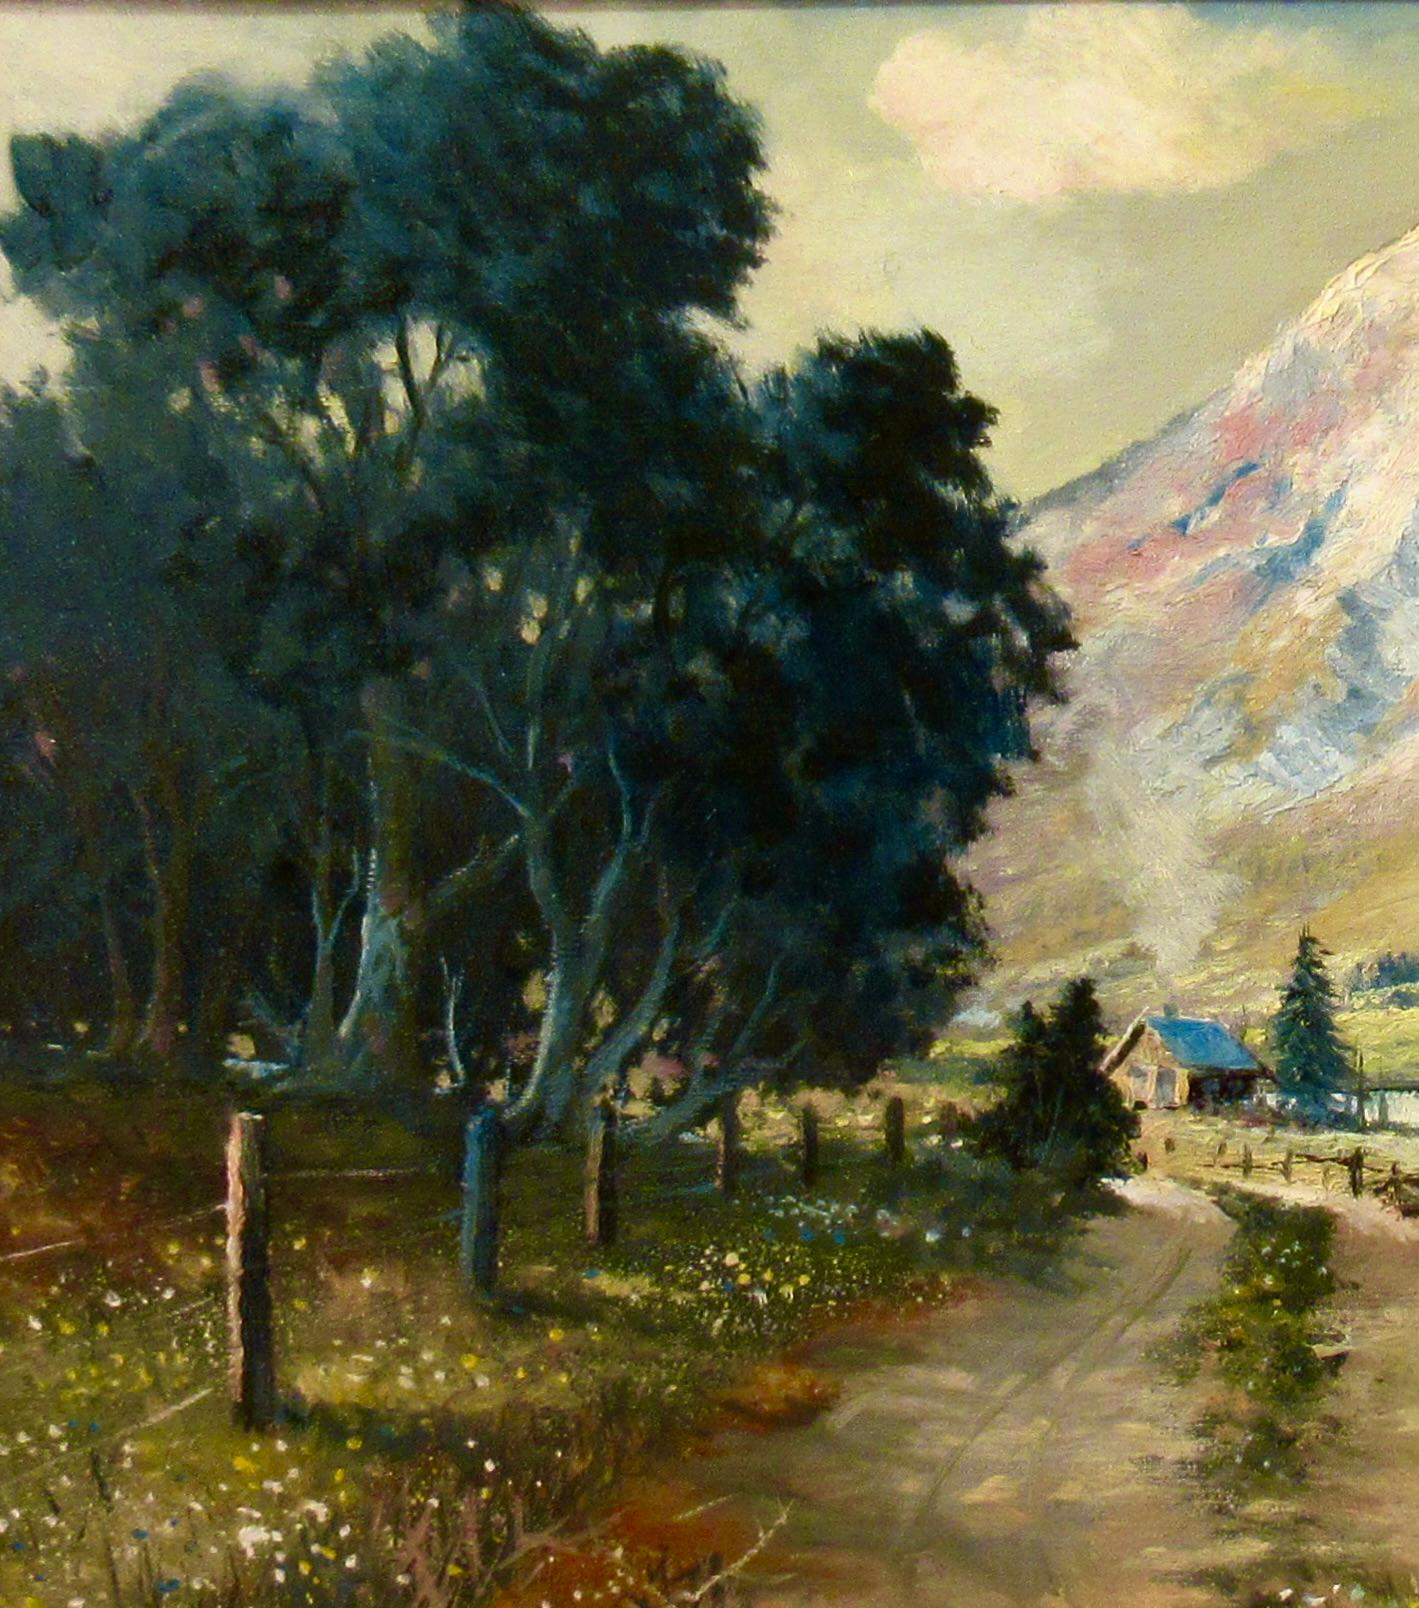 Evening in Jackson Hole - American Impressionist Painting by Bill Shaddix